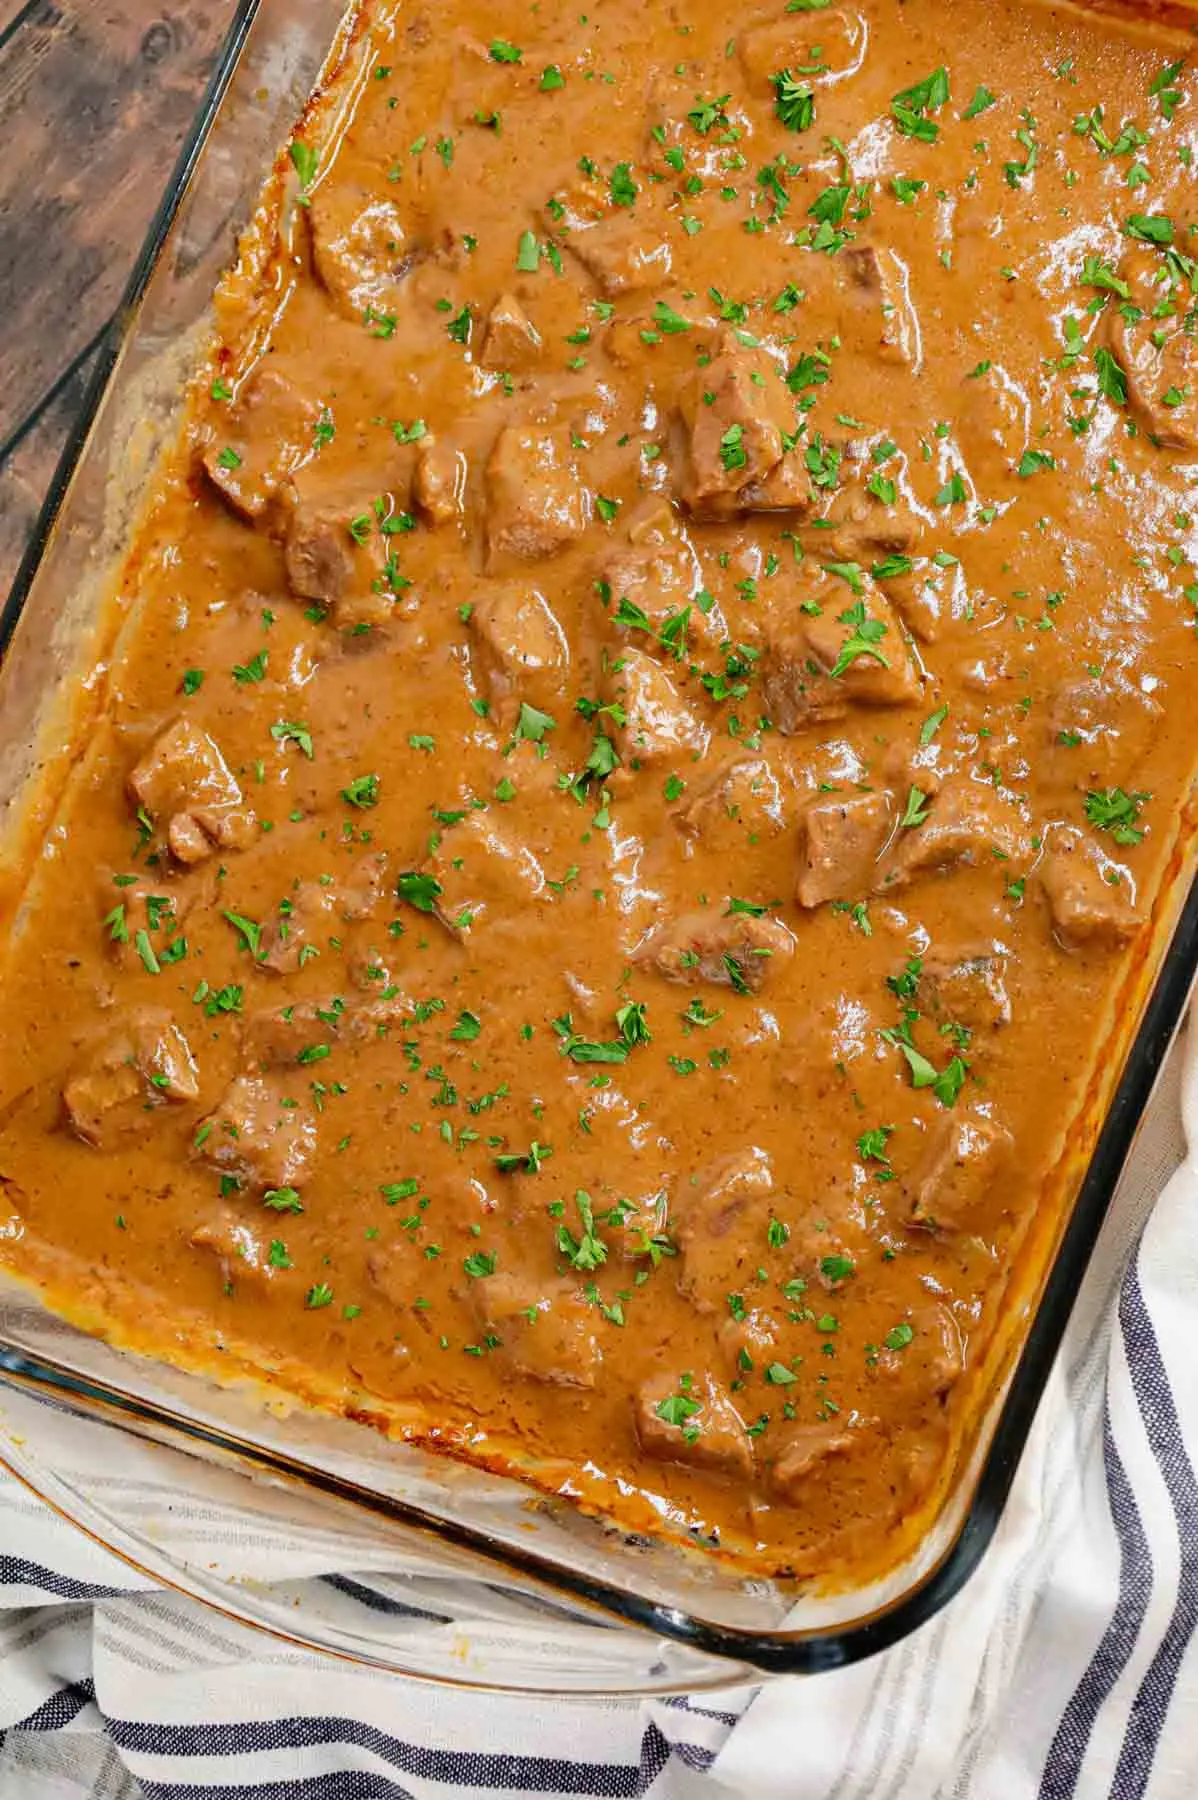 No Peek Beef Tips is a classic comfort food dish with cubes of beef cooked slowly in a delicious gravy made from cream of mushroom soup, beef broth, beef gravy mix and onion soup mix.